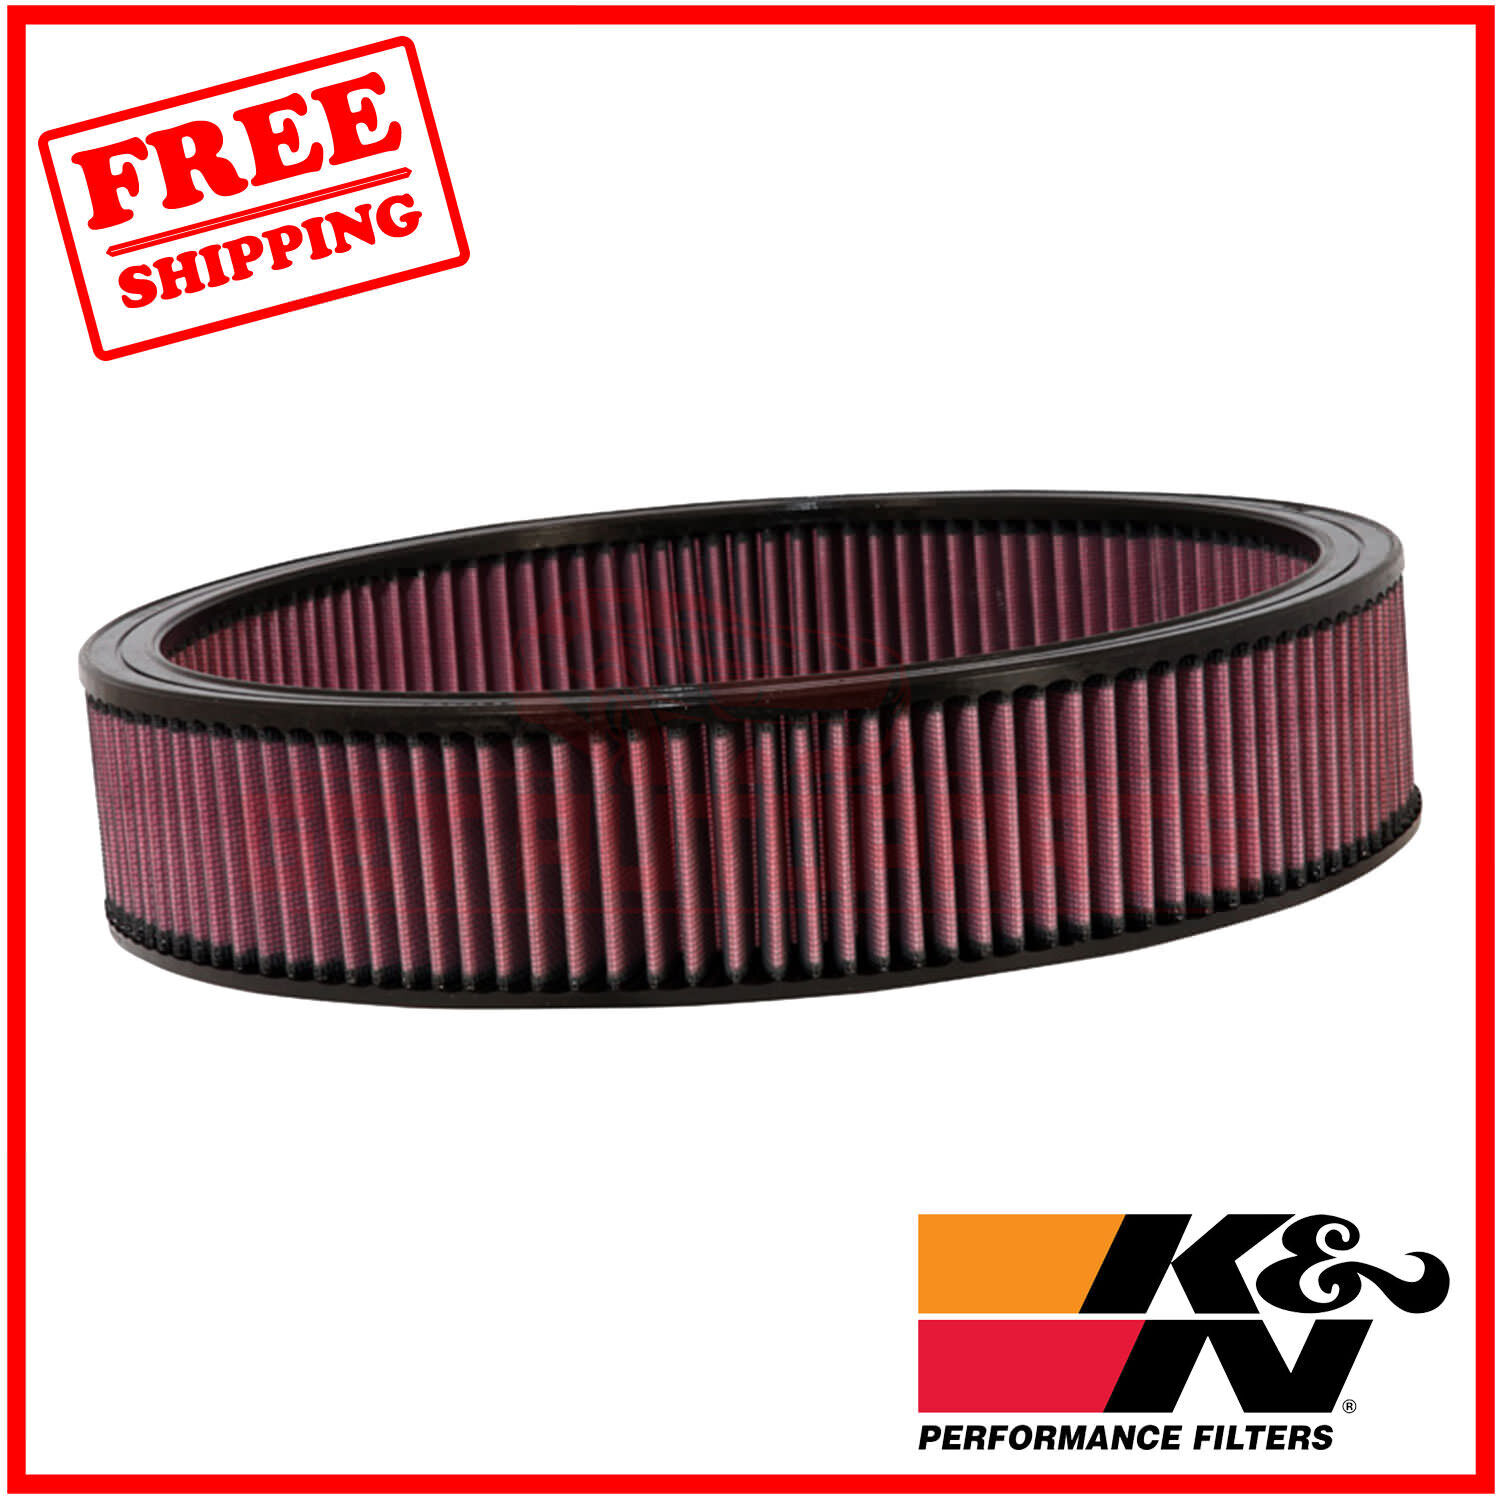 K&N Replacement Air Filter for Oldsmobile 442 1966-1971